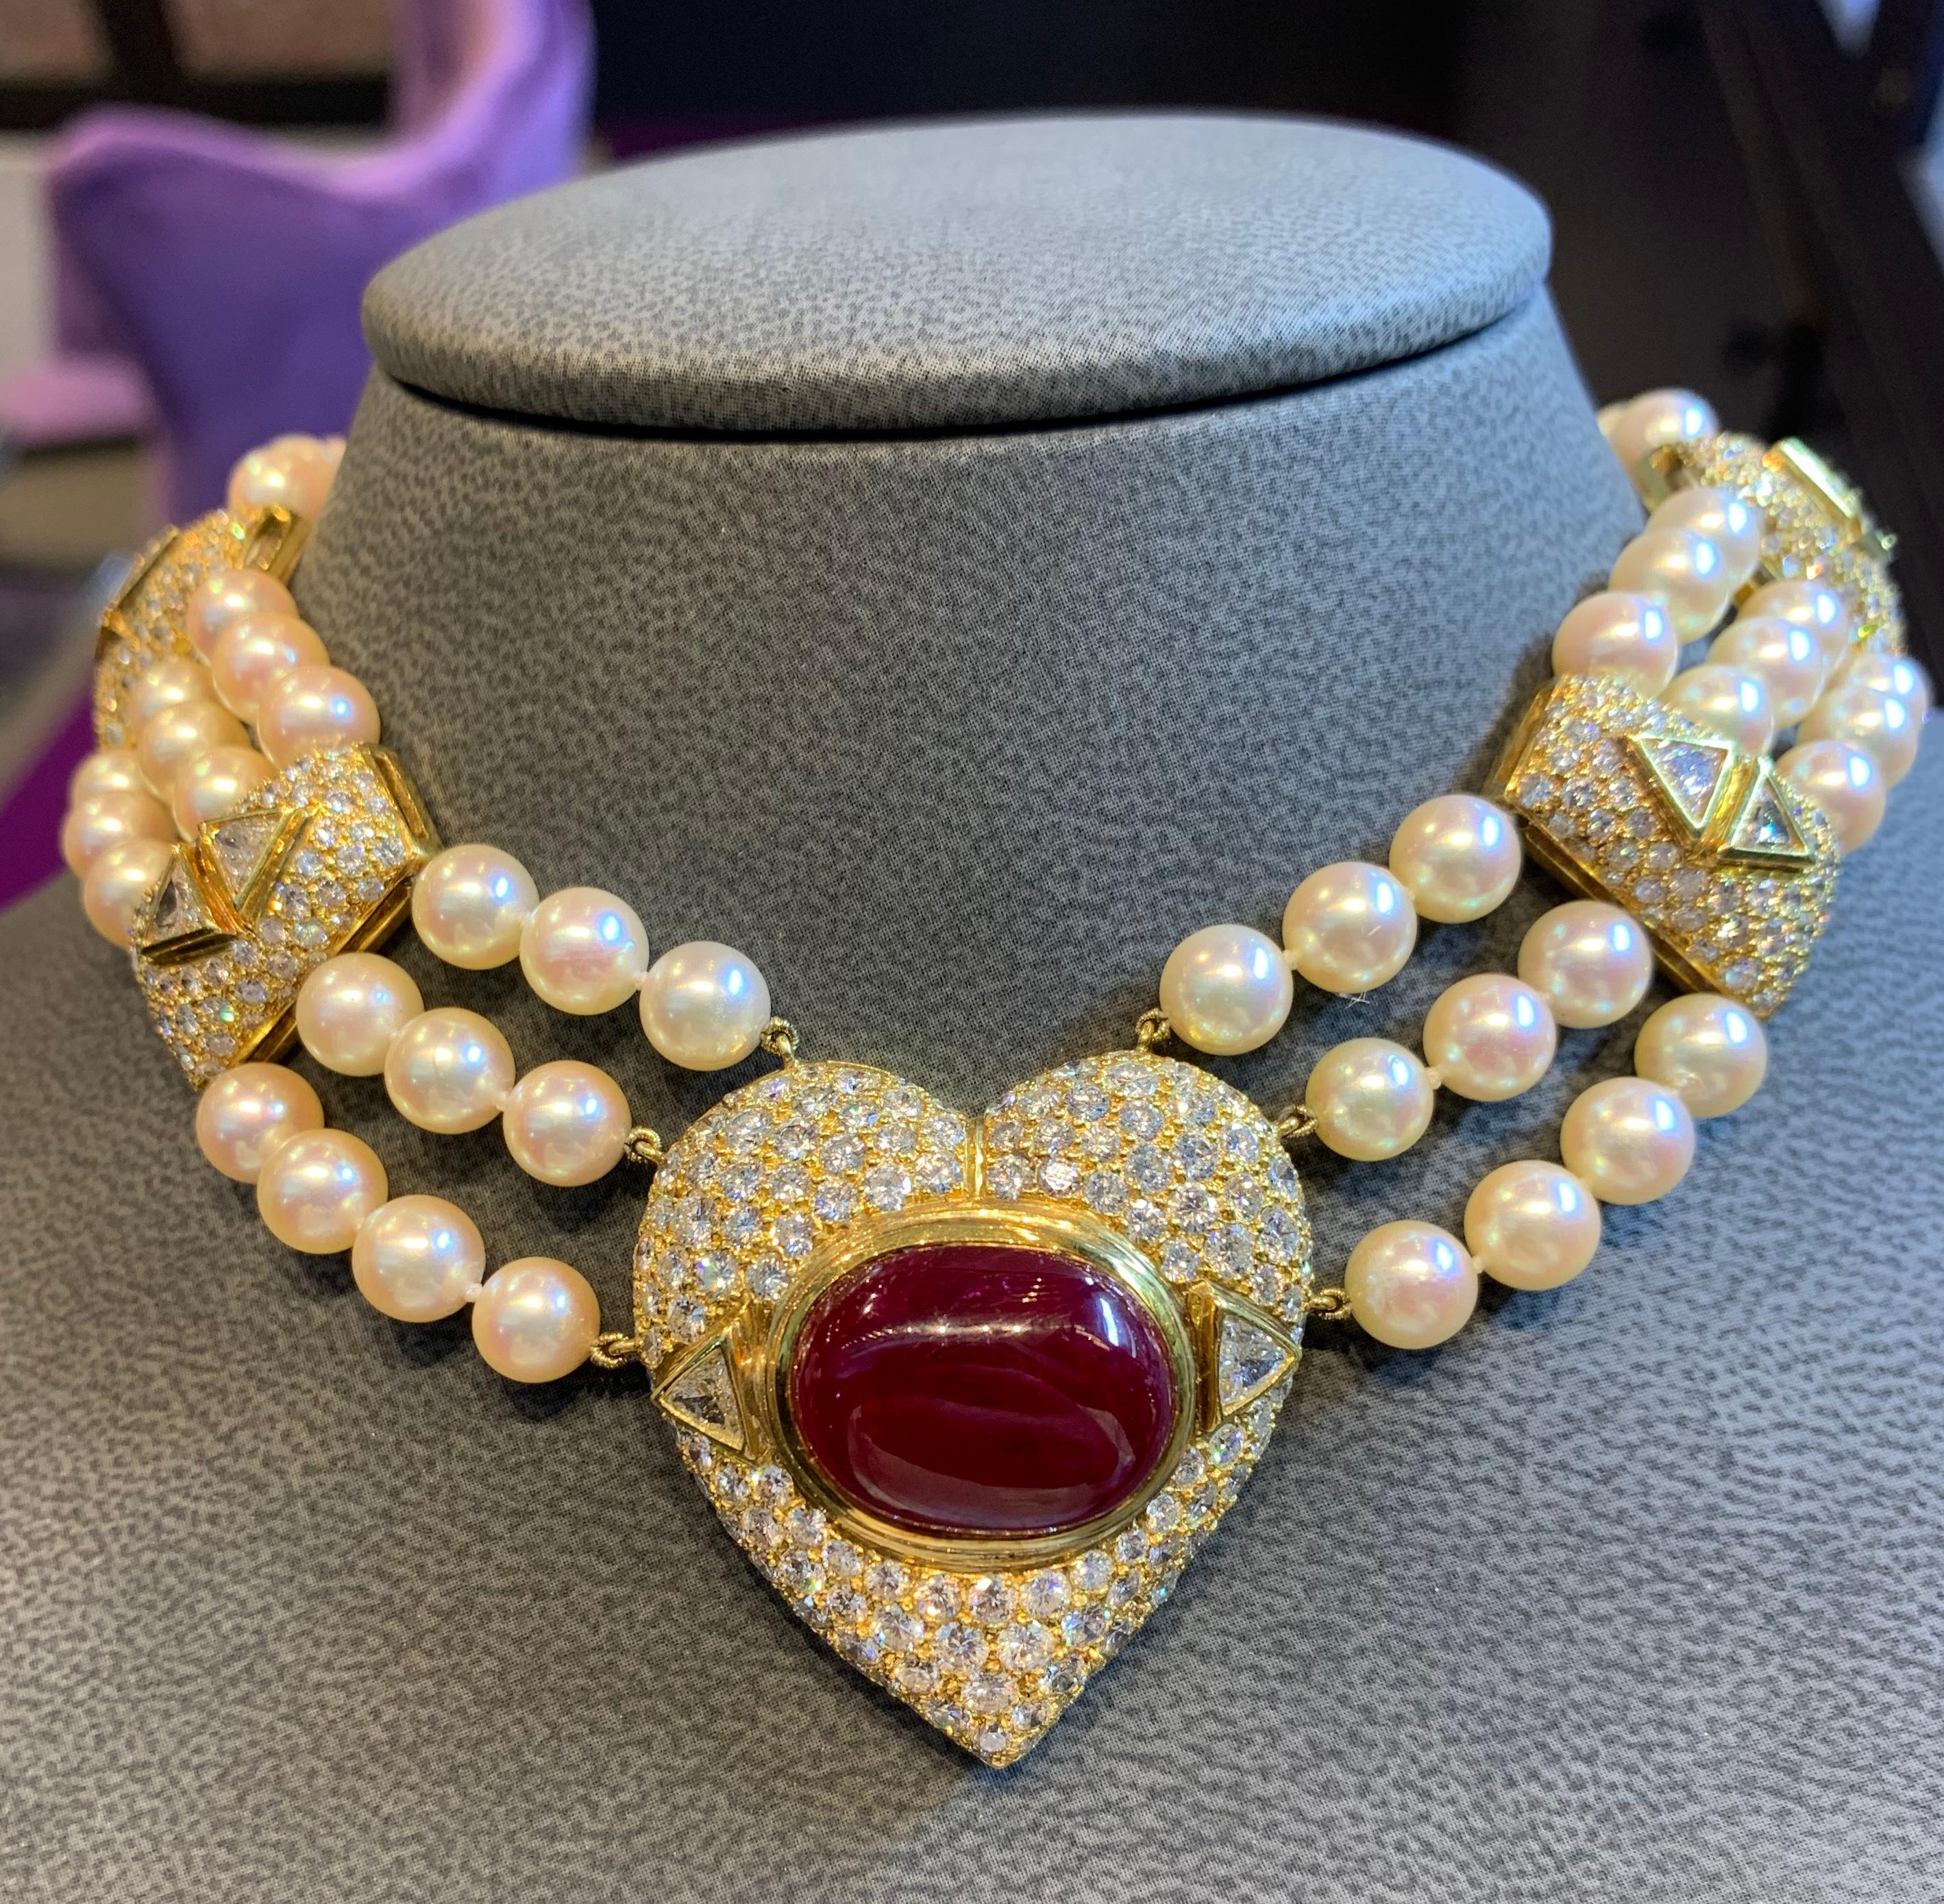 Pearl Diamond & Ruby Multi Strand Heart Necklace, 18K yellow gold
Ruby Weight: 19.40 Cts
Round Diamond Weight: 17.85 Cts
Trillion Diamond Weight: 3.35 Cts
Measurements: 14” long
